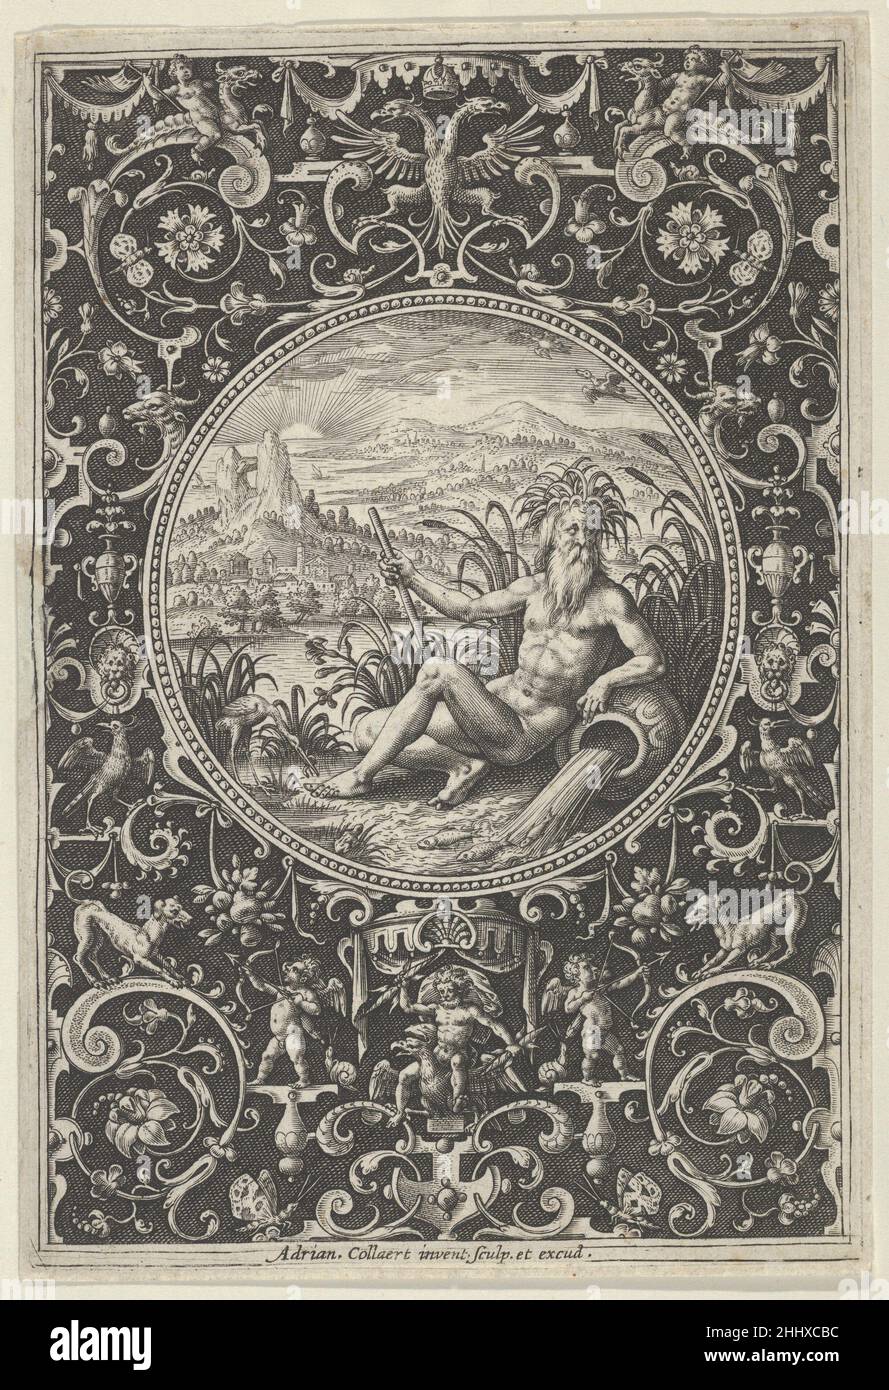 Neptune in a Decorative Frame with Grotesques, from the Judgment of Paris ca. 1580–1600 Adriaen Collaert Netherlandish Plate 2 from a series of six devoted to the figures in the mythological story of the Judgment of Paris. Vertical panel with an older male figure, commonly identified as Neptune, reclining in a landscape in a medallion at center. The seated figure leans on a vase, which lies on its side at right and is shown spilling its contents (water and fish) on the ground. Surrounding the medallion, a dark background with grotesque ornament, including a figure riding an eagle under a canop Stock Photo